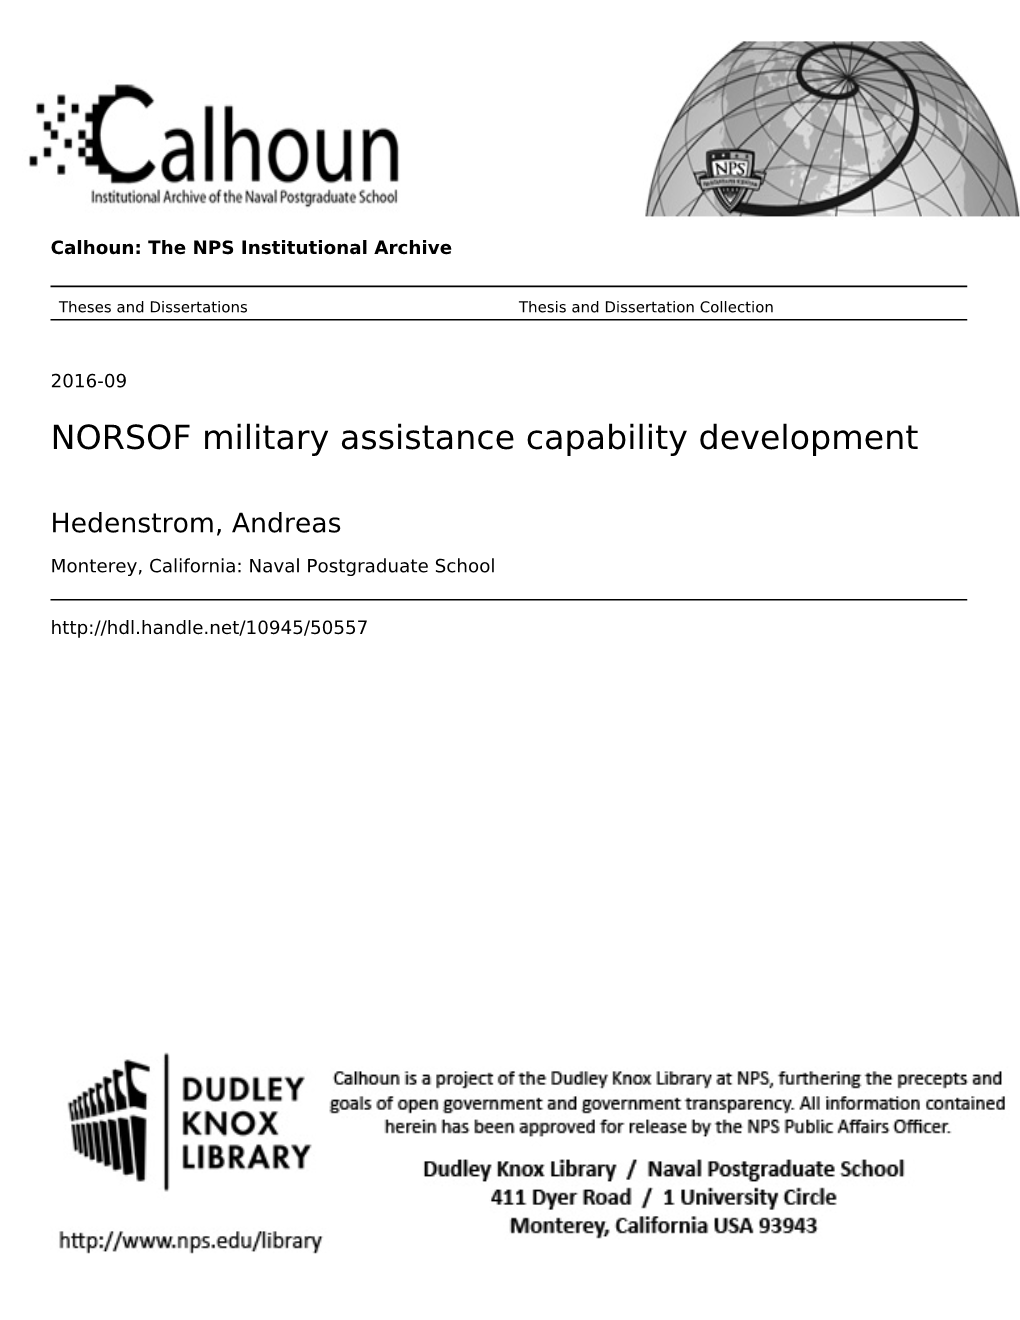 NORSOF Military Assistance Capability Development